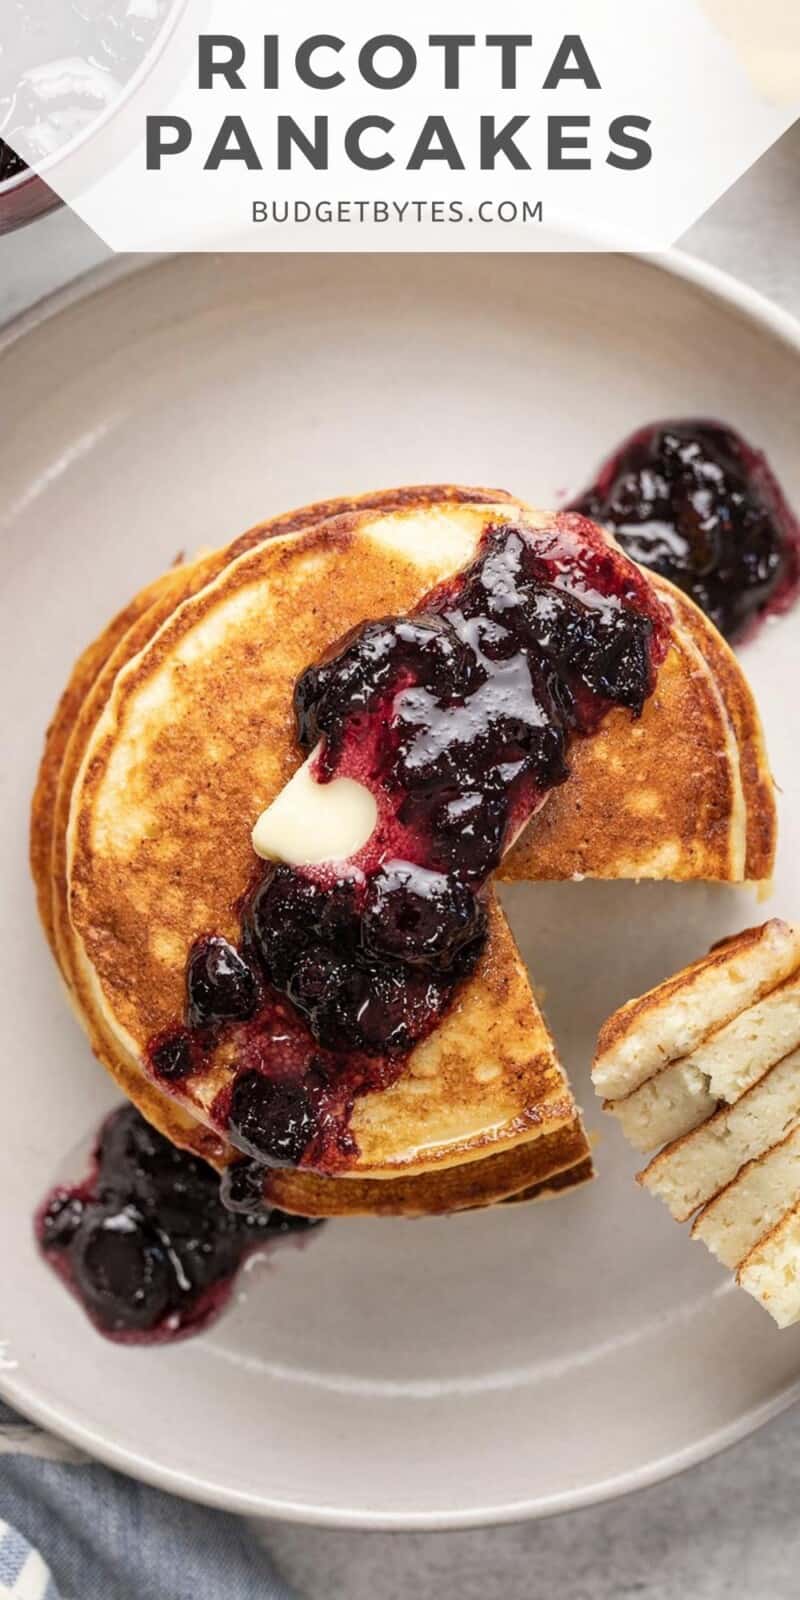 Overhead shot of ricotta pancake stack with blueberry sauce and a fork with a slice of the stack on it.